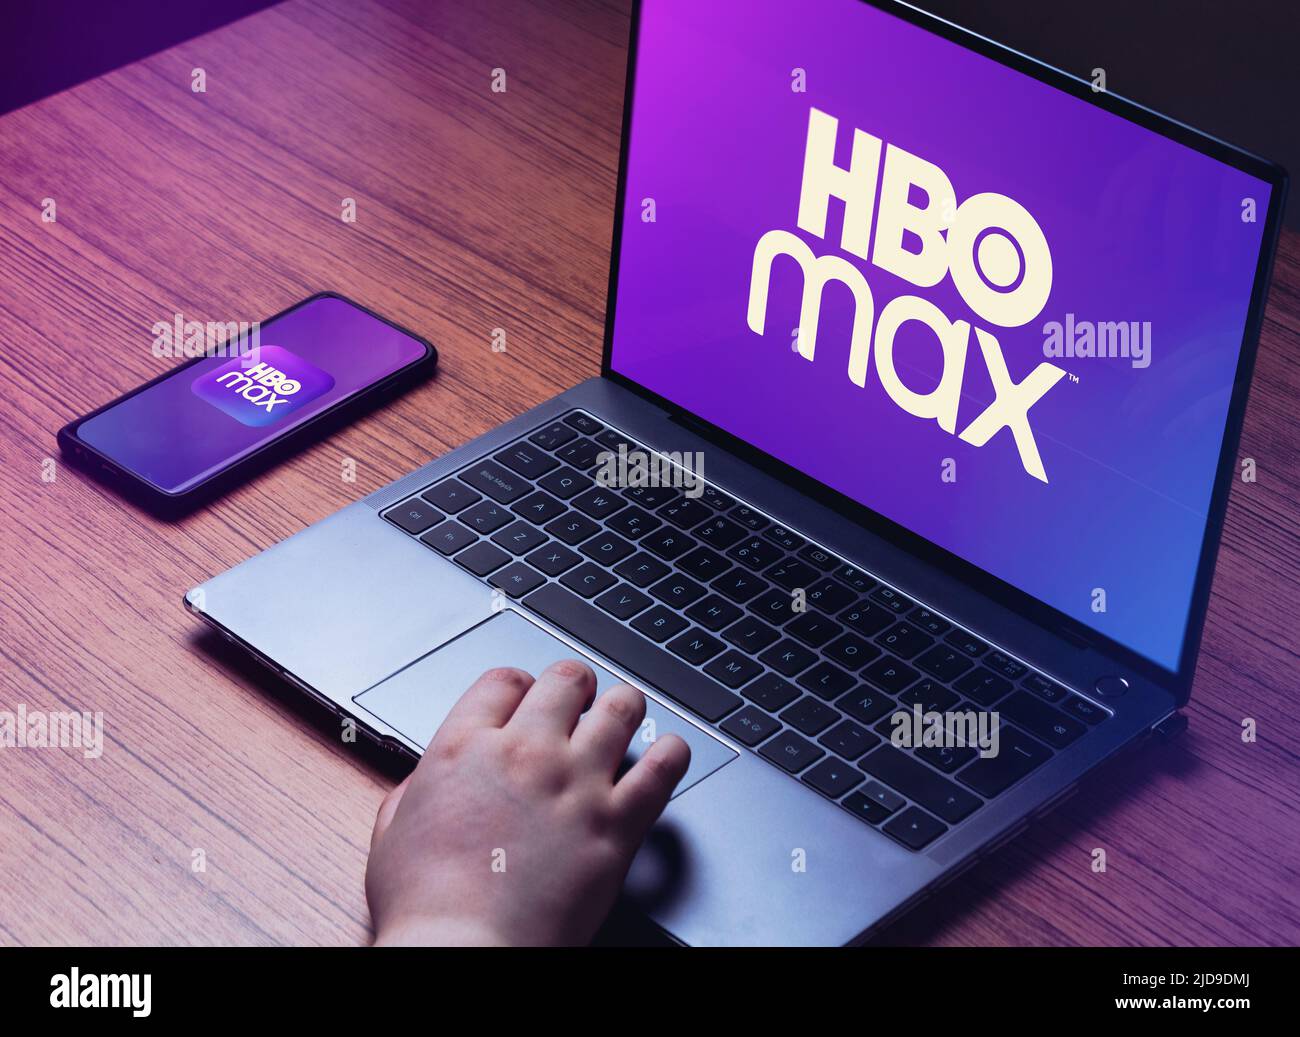 Young woman watching HBO Max on laptop. HBO Max logo on laptop and smartphone screens. Wood desk with laptop and smart Stock Photo